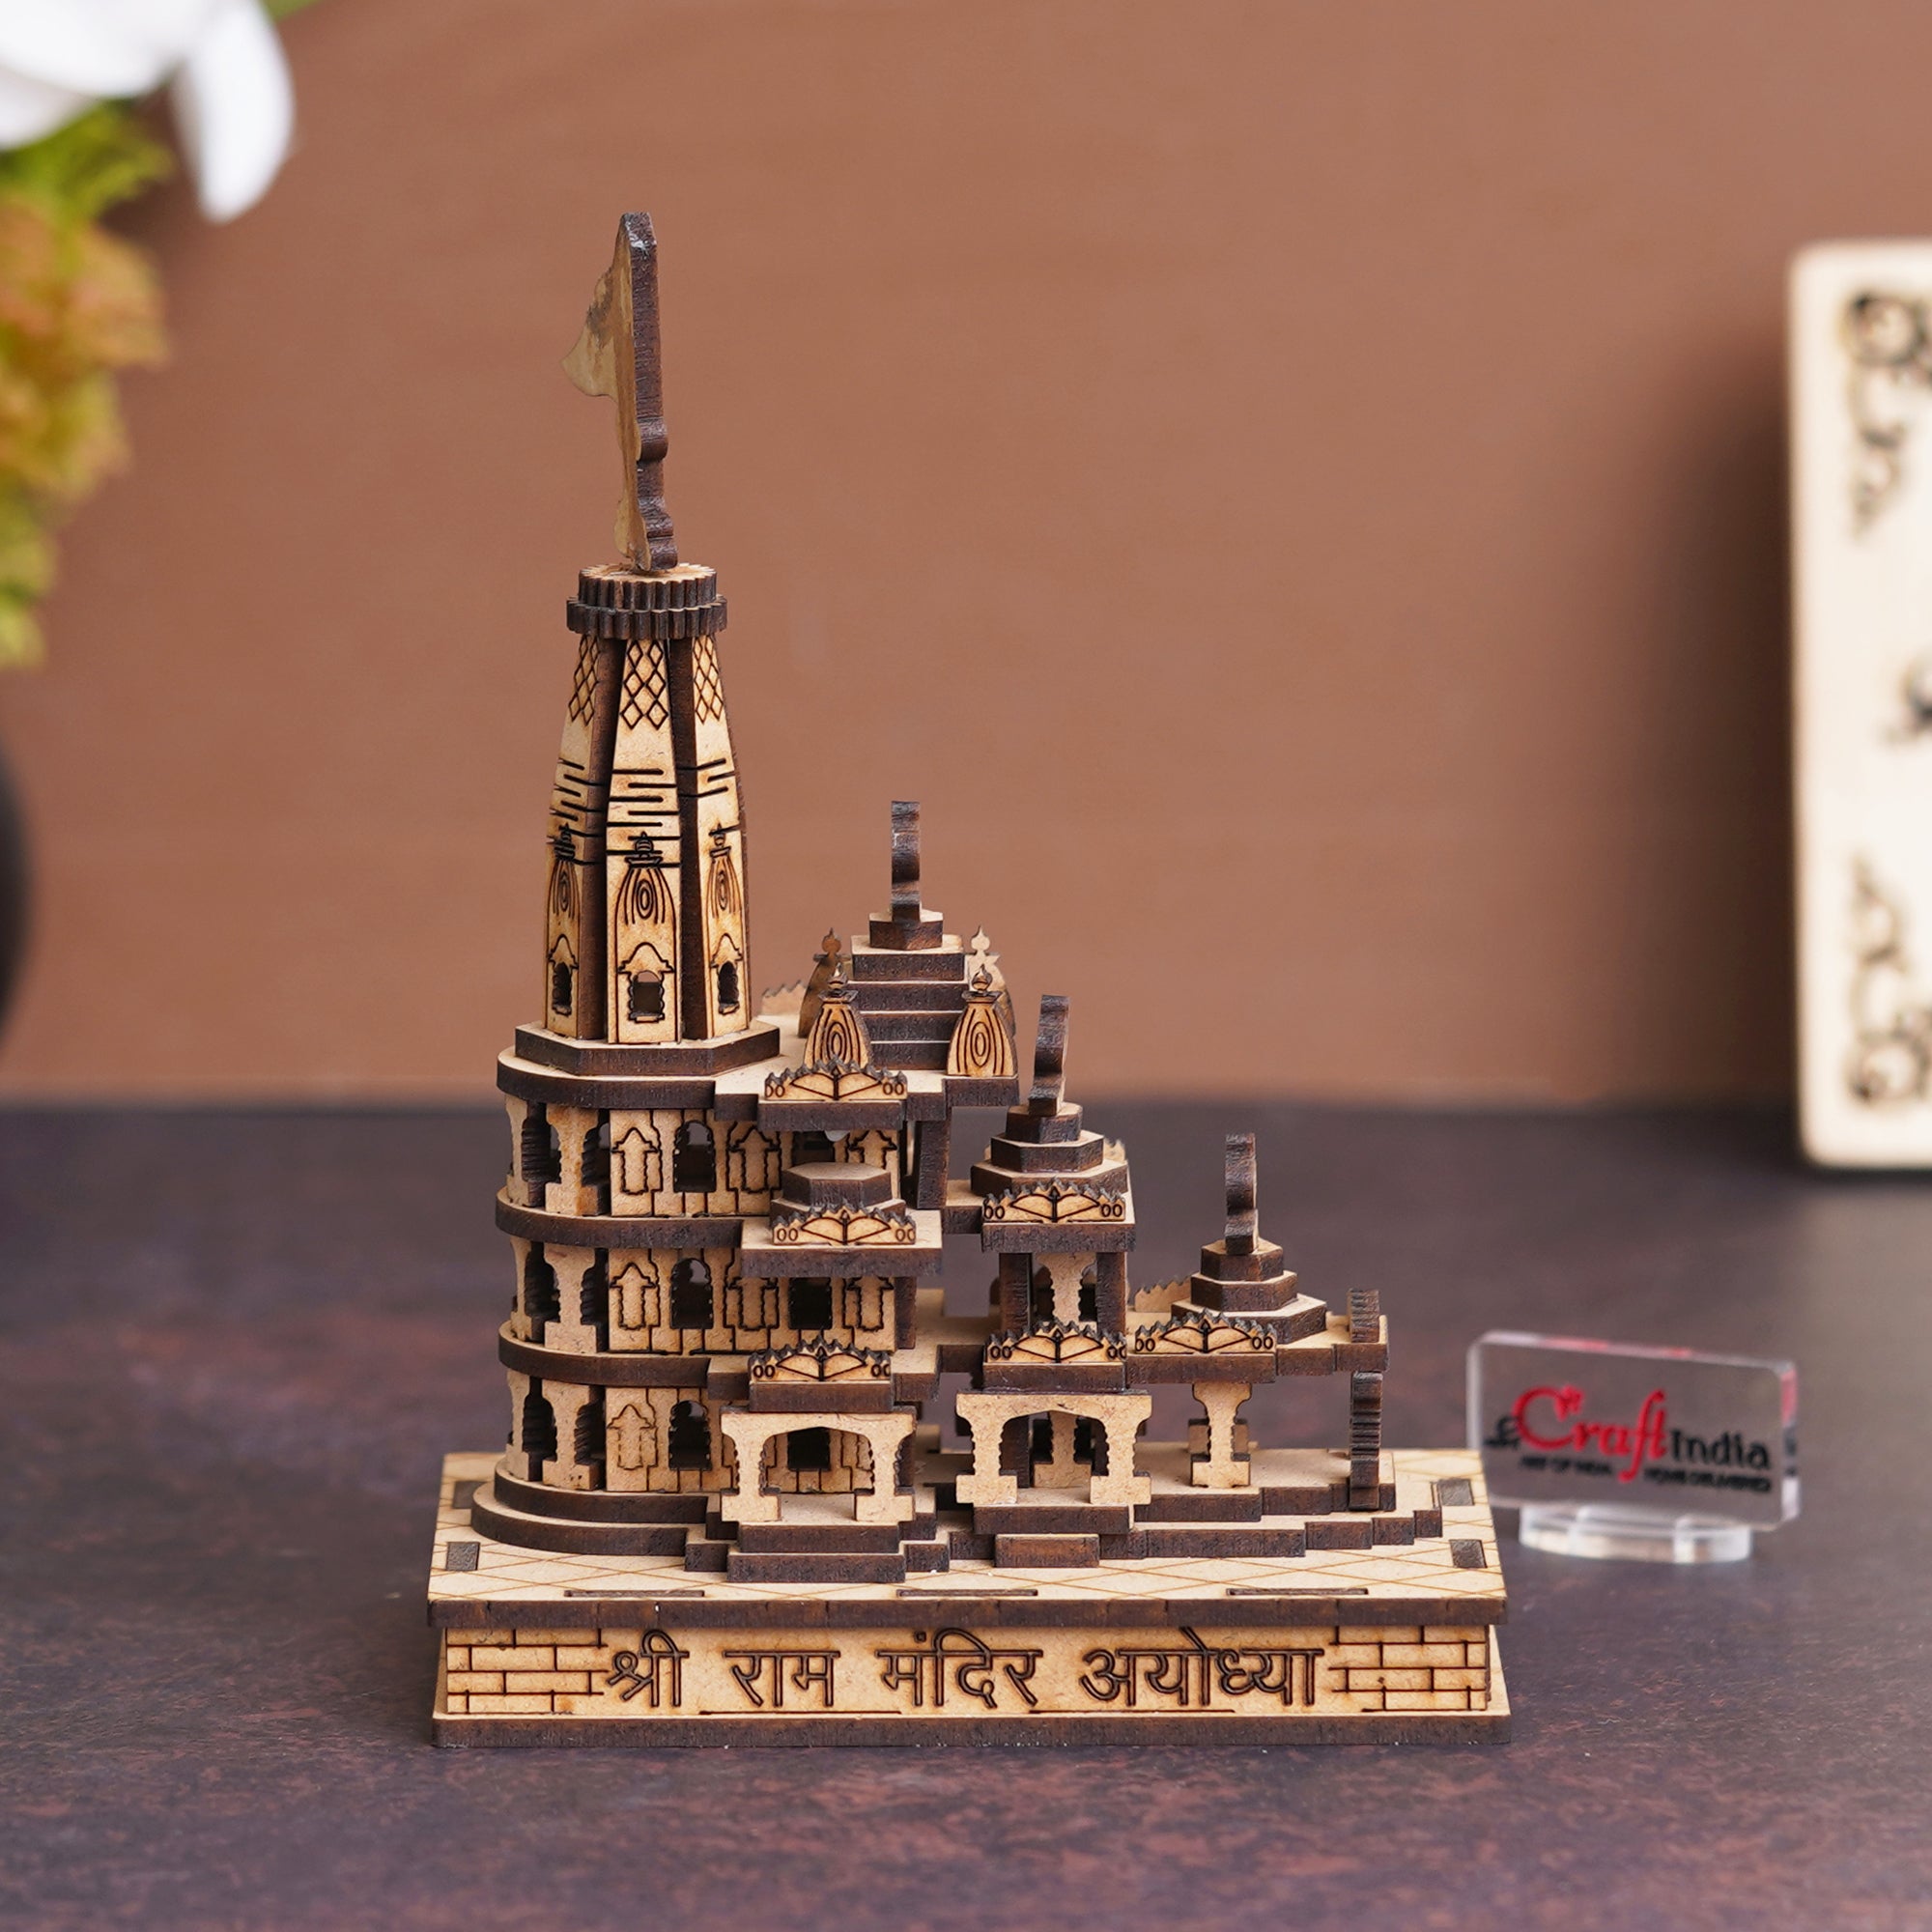 eCraftIndia Shri Ram Mandir Ayodhya Model - Wooden MDF Craftsmanship Authentic Designer Temple with Protective Gift Box - Ideal for Home Temple, Decor, and Spiritual Gifting